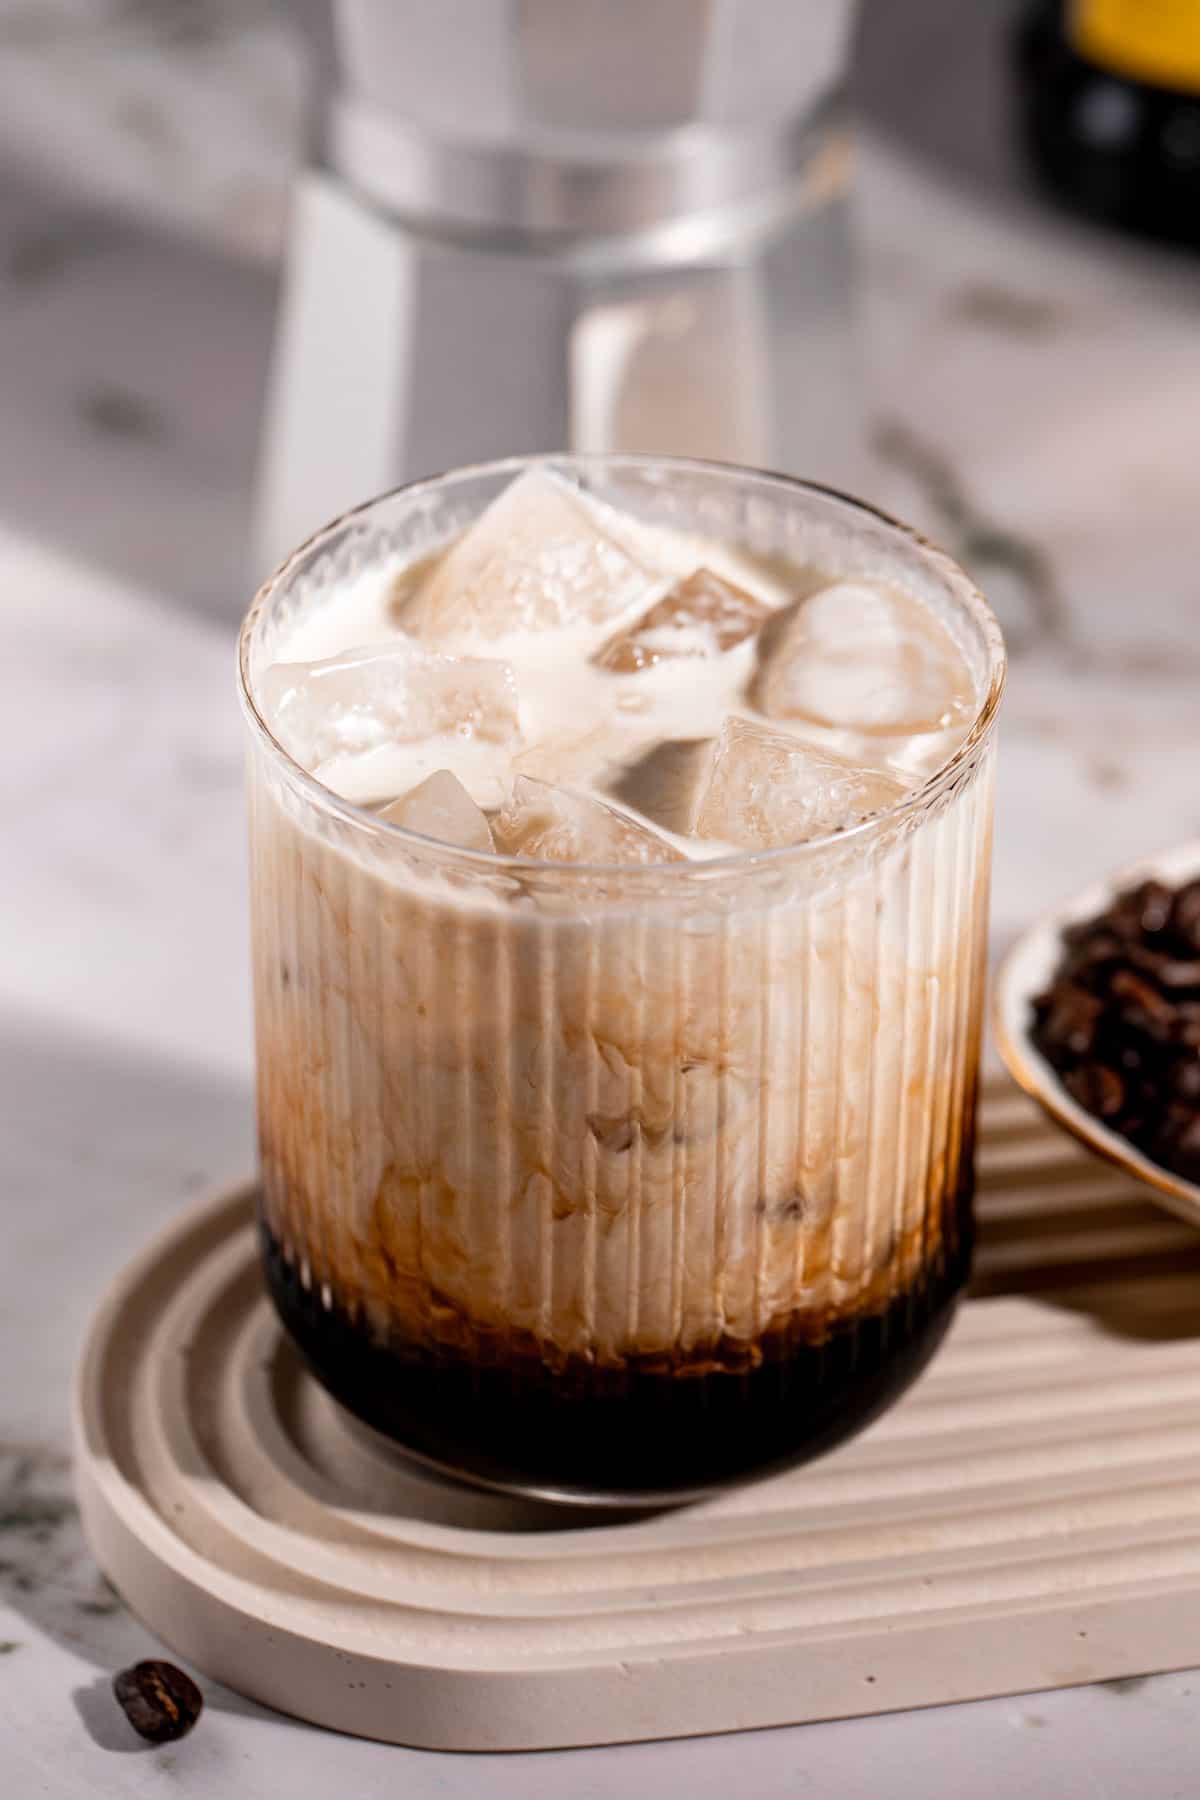 A White Russian Screwball Drink served with ice.